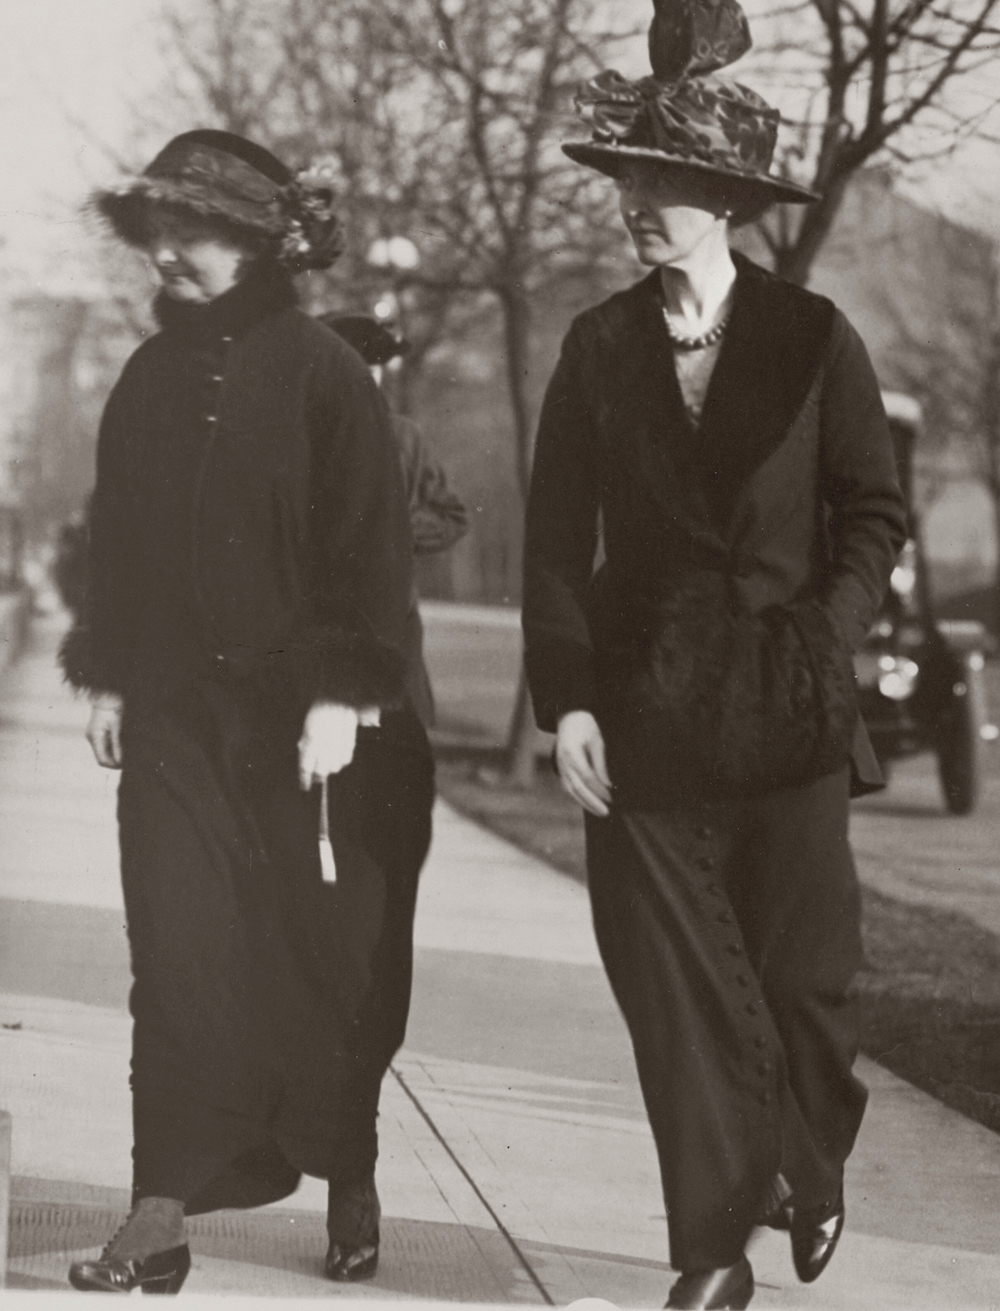 Fola la Follette going to the annual meeting for The Congressional Union for Woman Suffrage on Jan. 11, 1914.